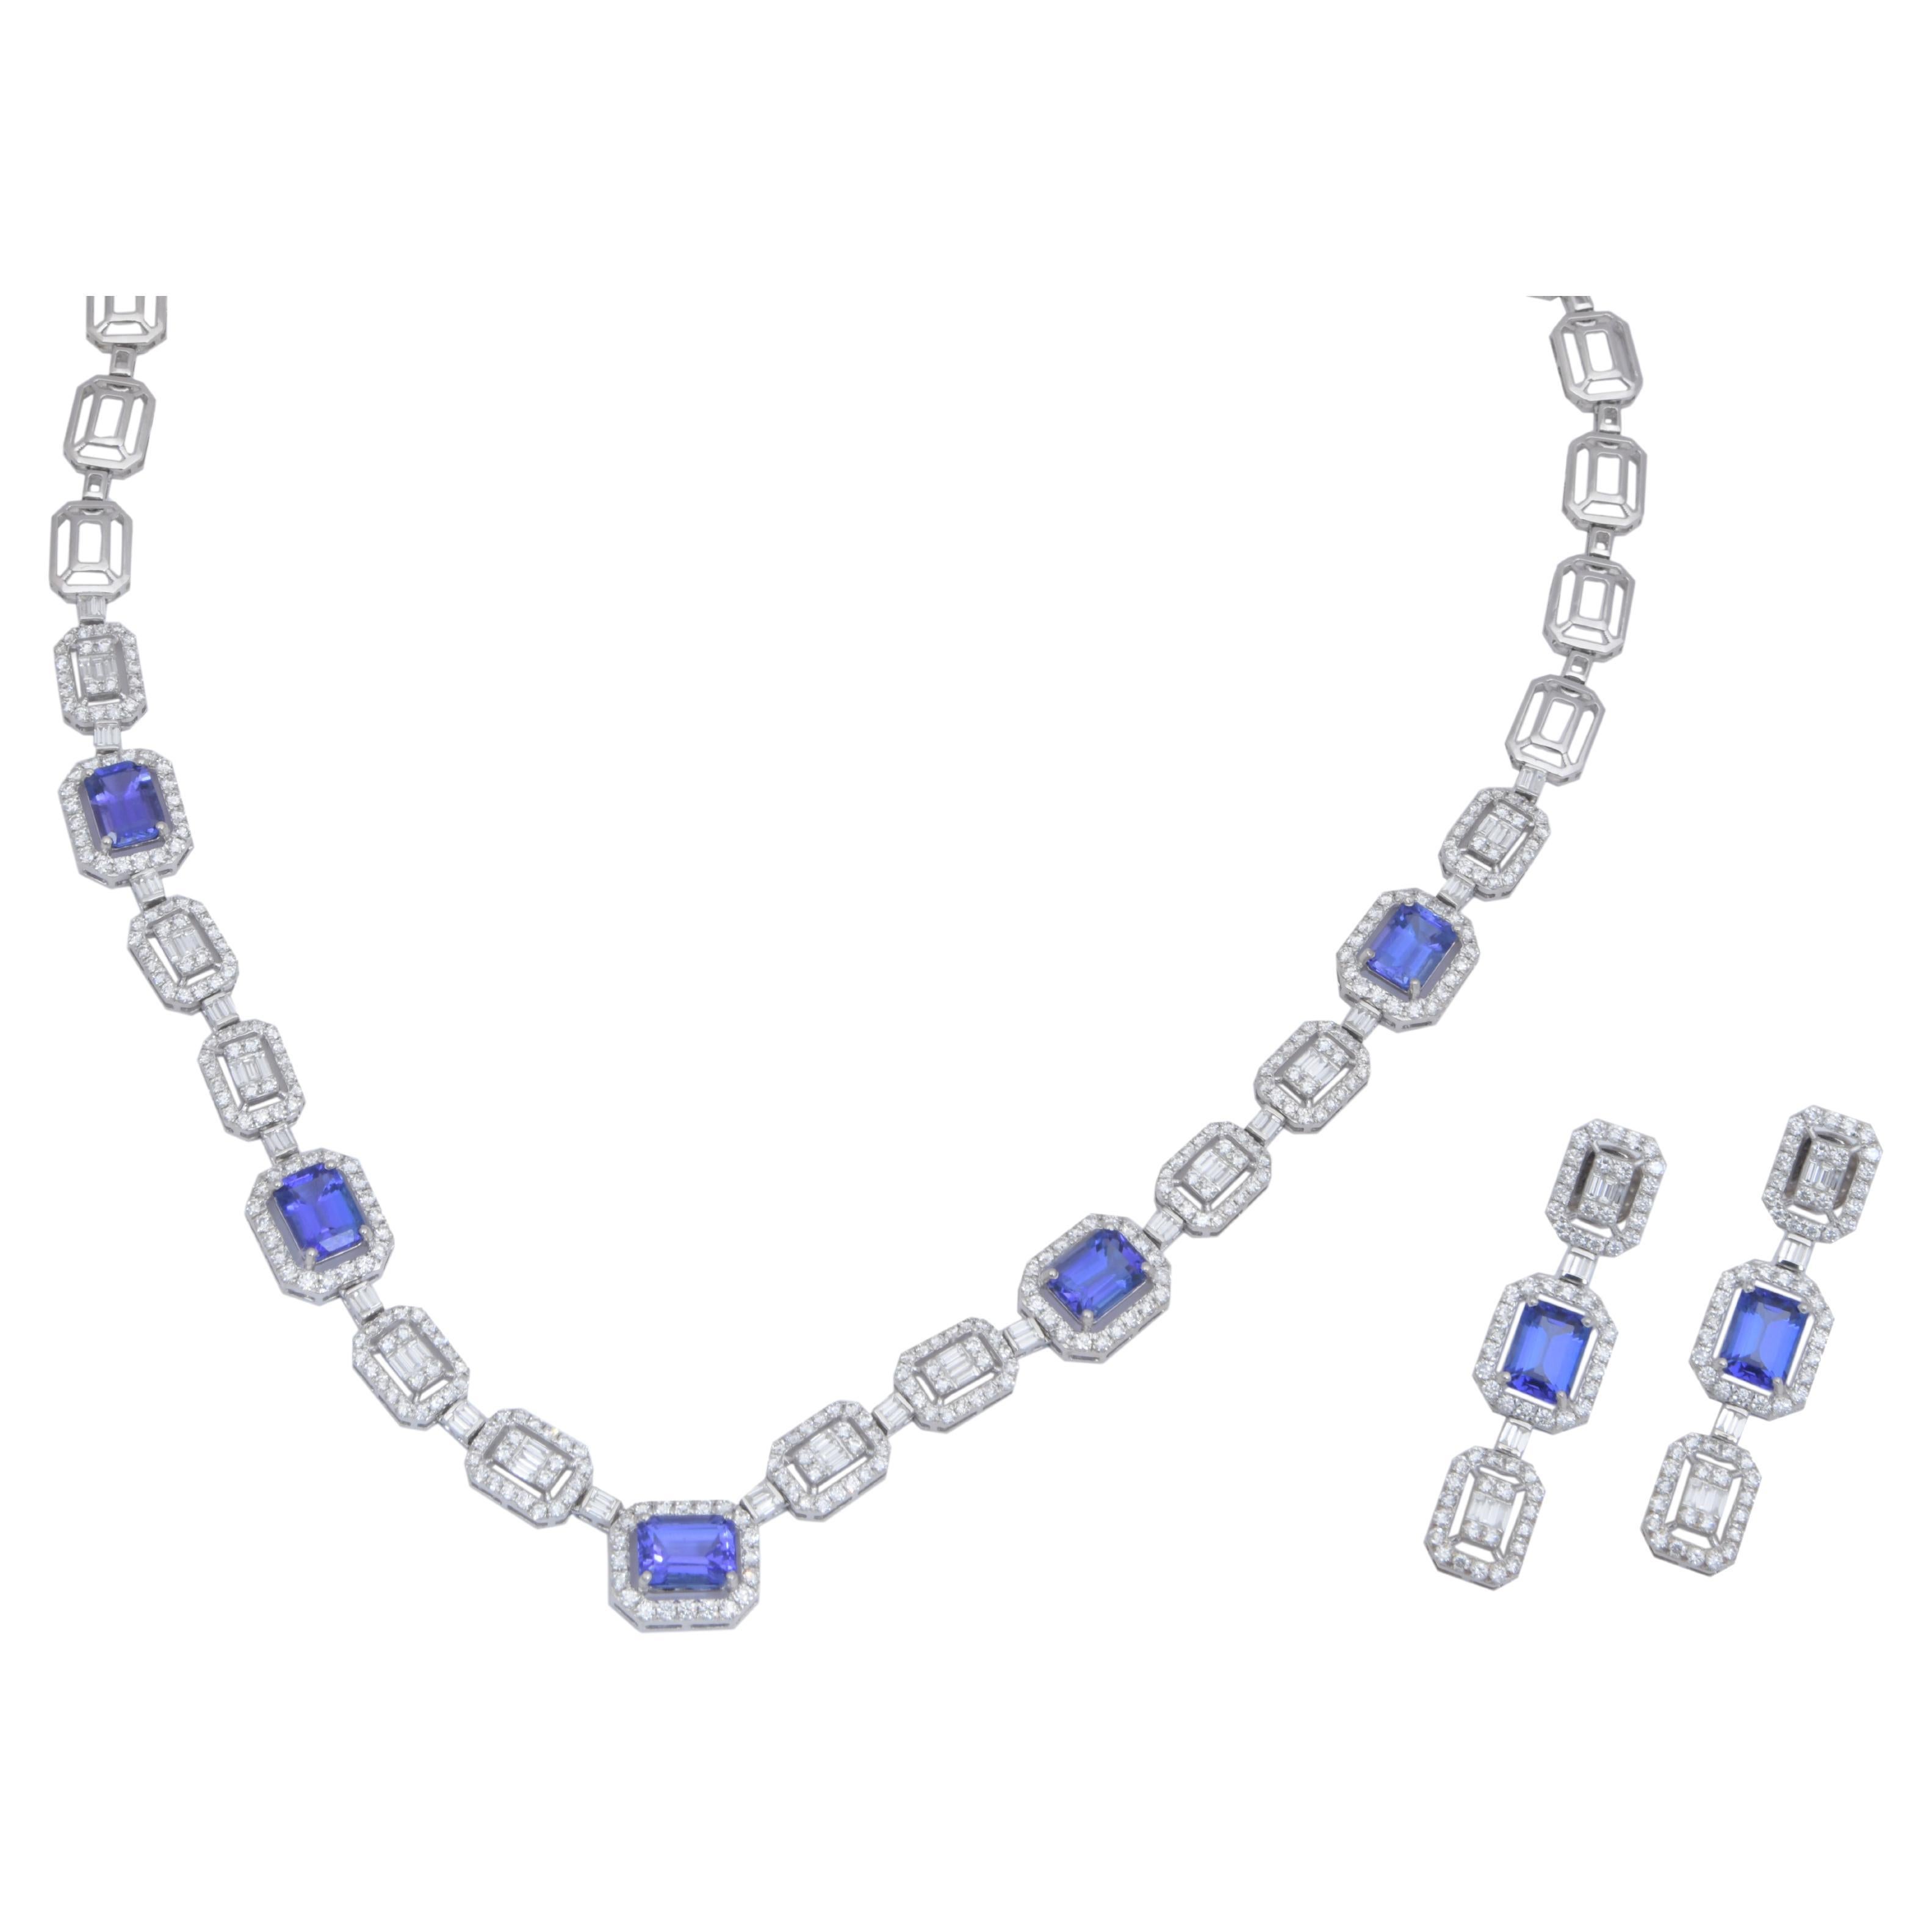 Natural Tanzanite Necklace 7.74cts Diamond & 12.13cts Tanzanite Withgold 14k For Sale